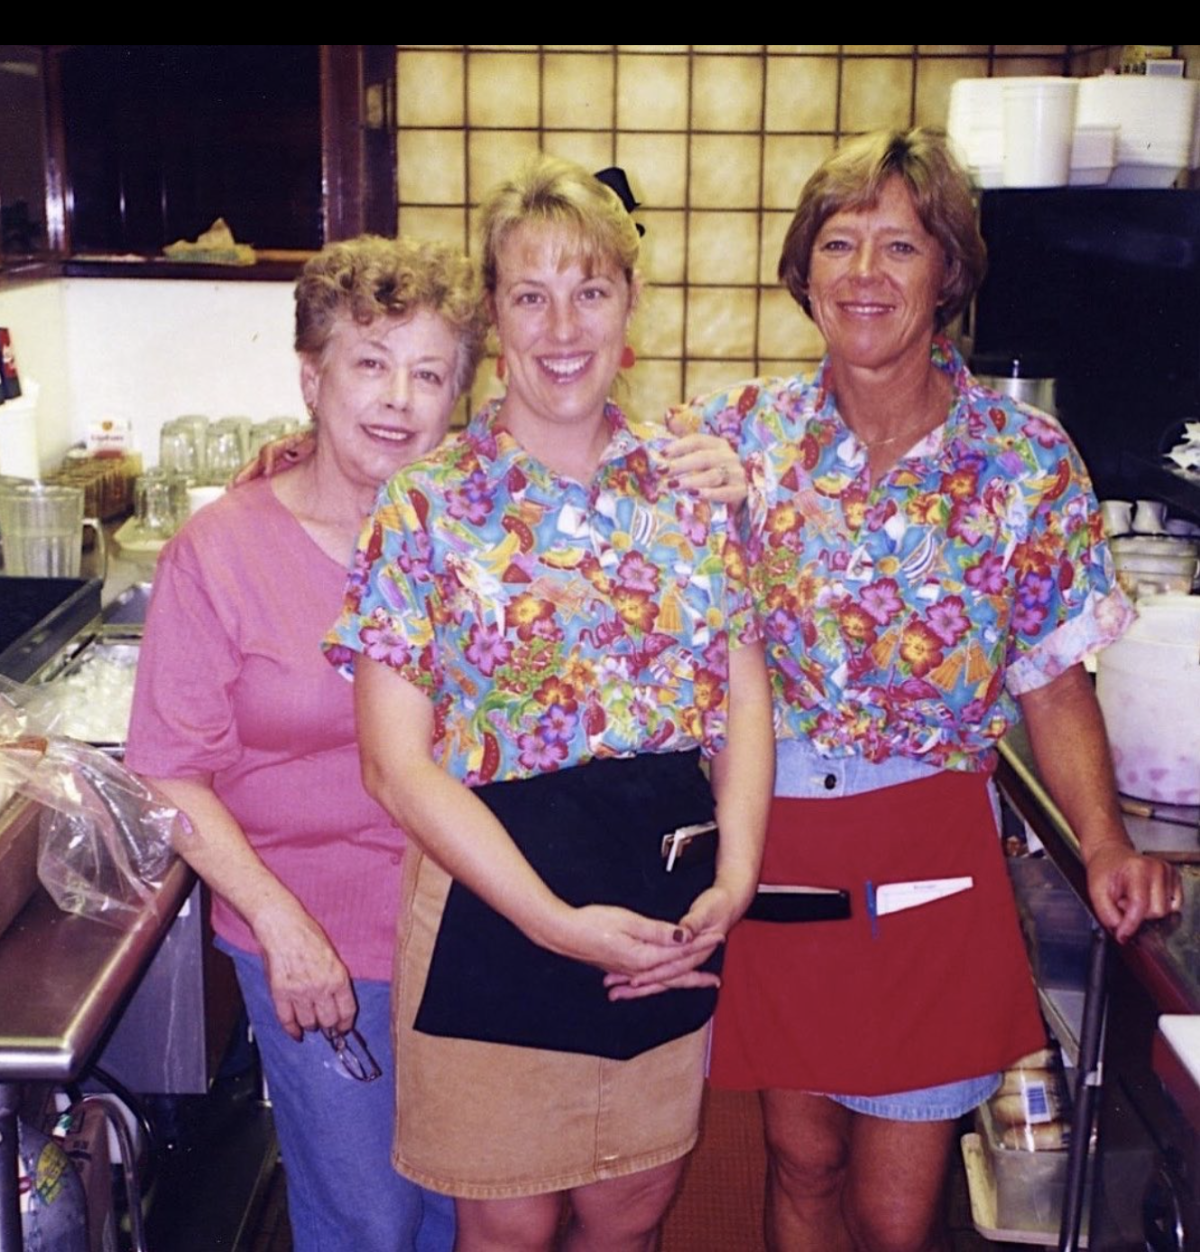 Pictured in the old restaurant's kitchen from left to right is Wilma Staudinger, Sheri Drewry and Gretchen Hatfield in 1997.